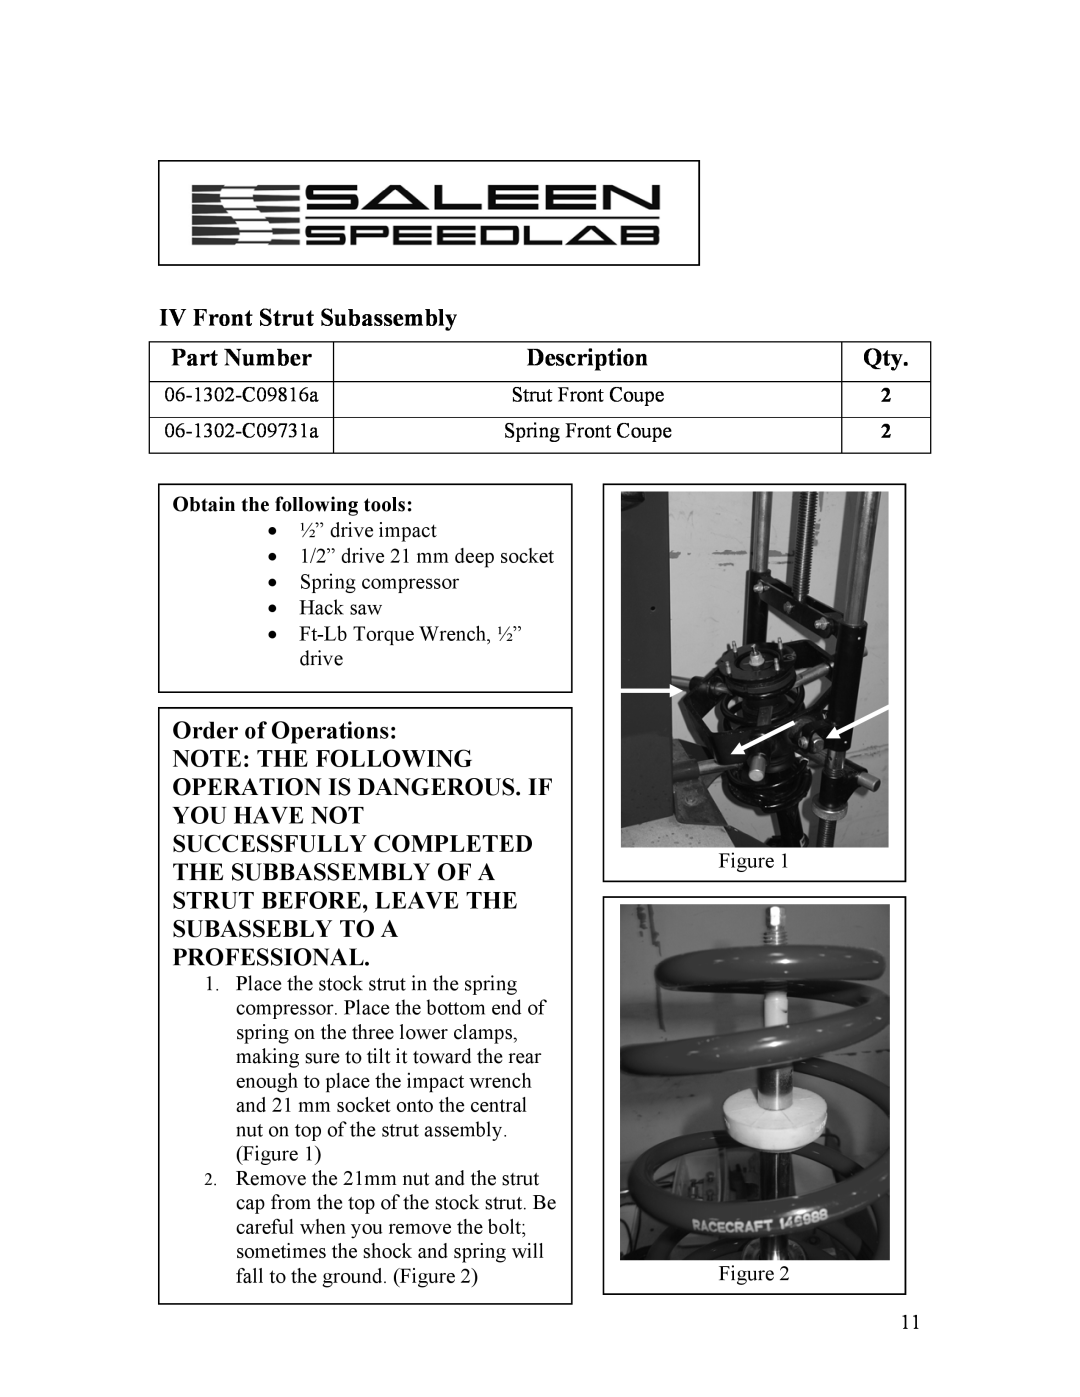 Saleen 10-8002-C11790A IV Front Strut Subassembly, Part Number, Description, Order of Operations, Strut Front Coupe 